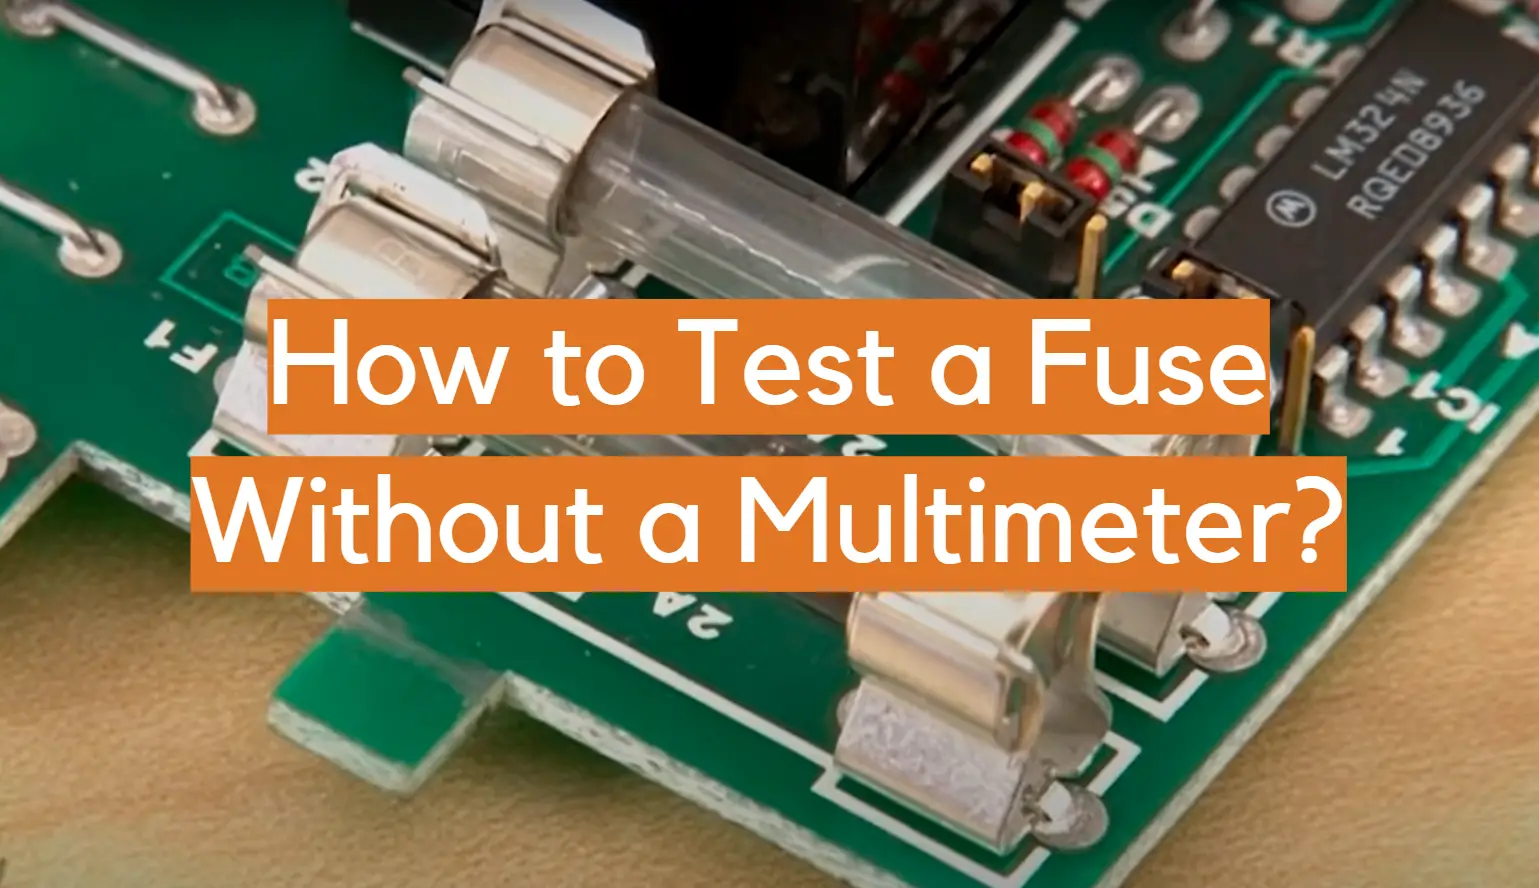 How to Test a Fuse Without a Multimeter?